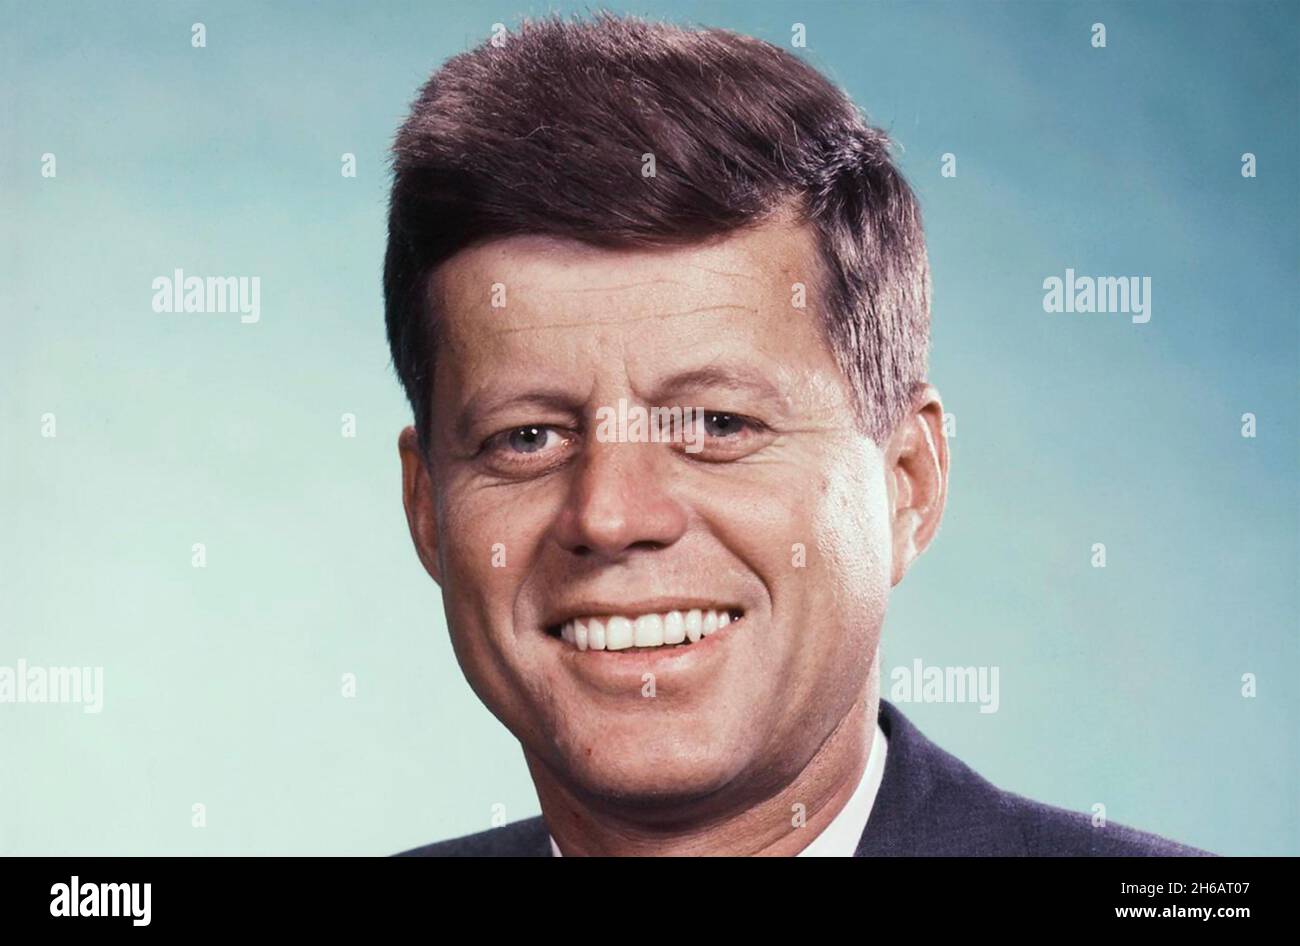 JOHN F. KENNEDY (1917-1963) as 35th President of the United States in 1963 Stock Photo